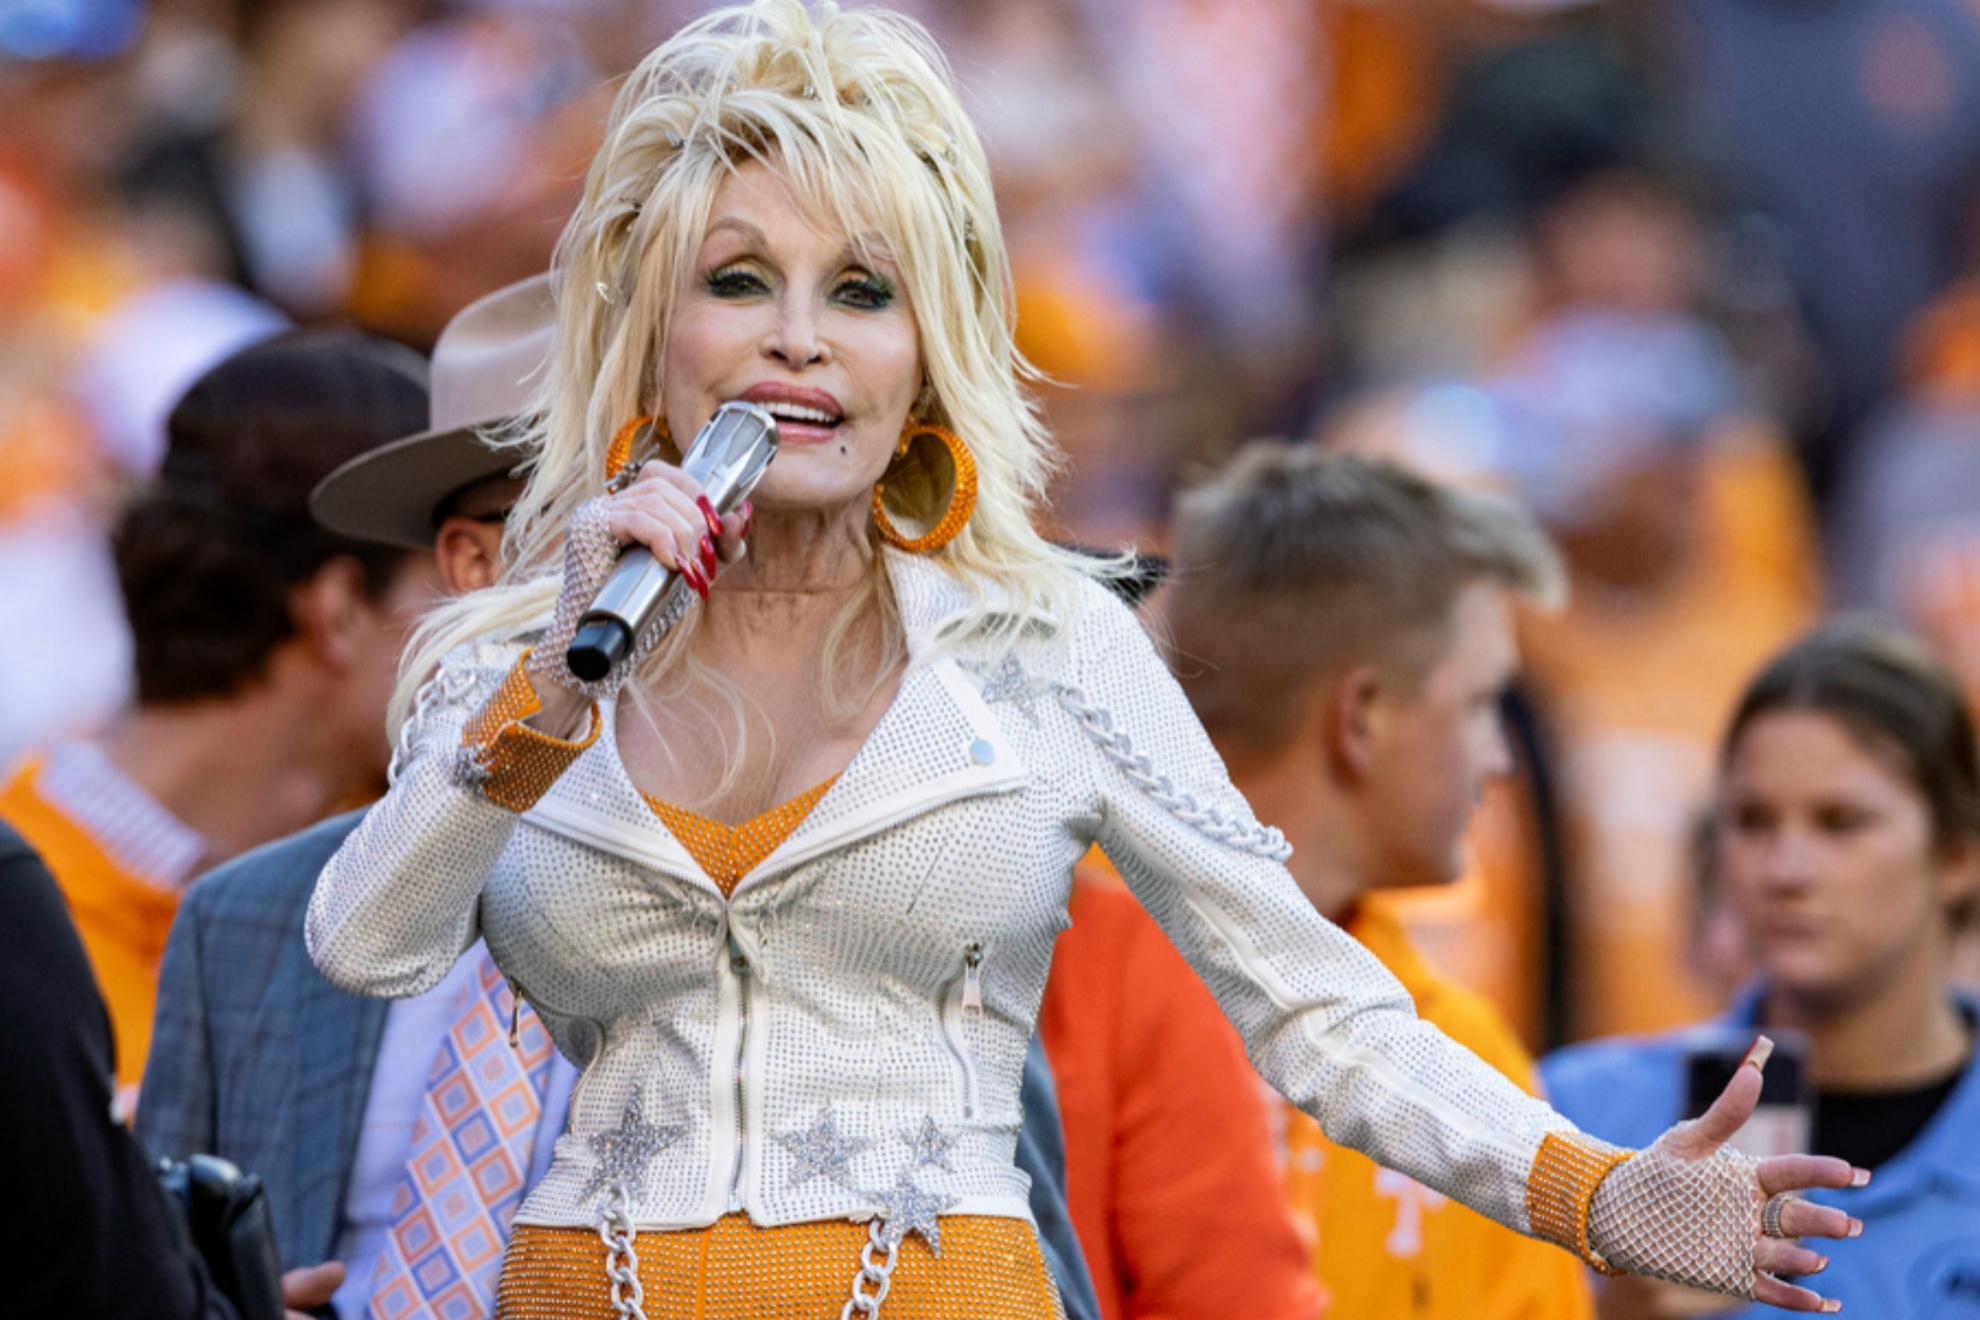 Dolly Parton is one of country music's biggest legends